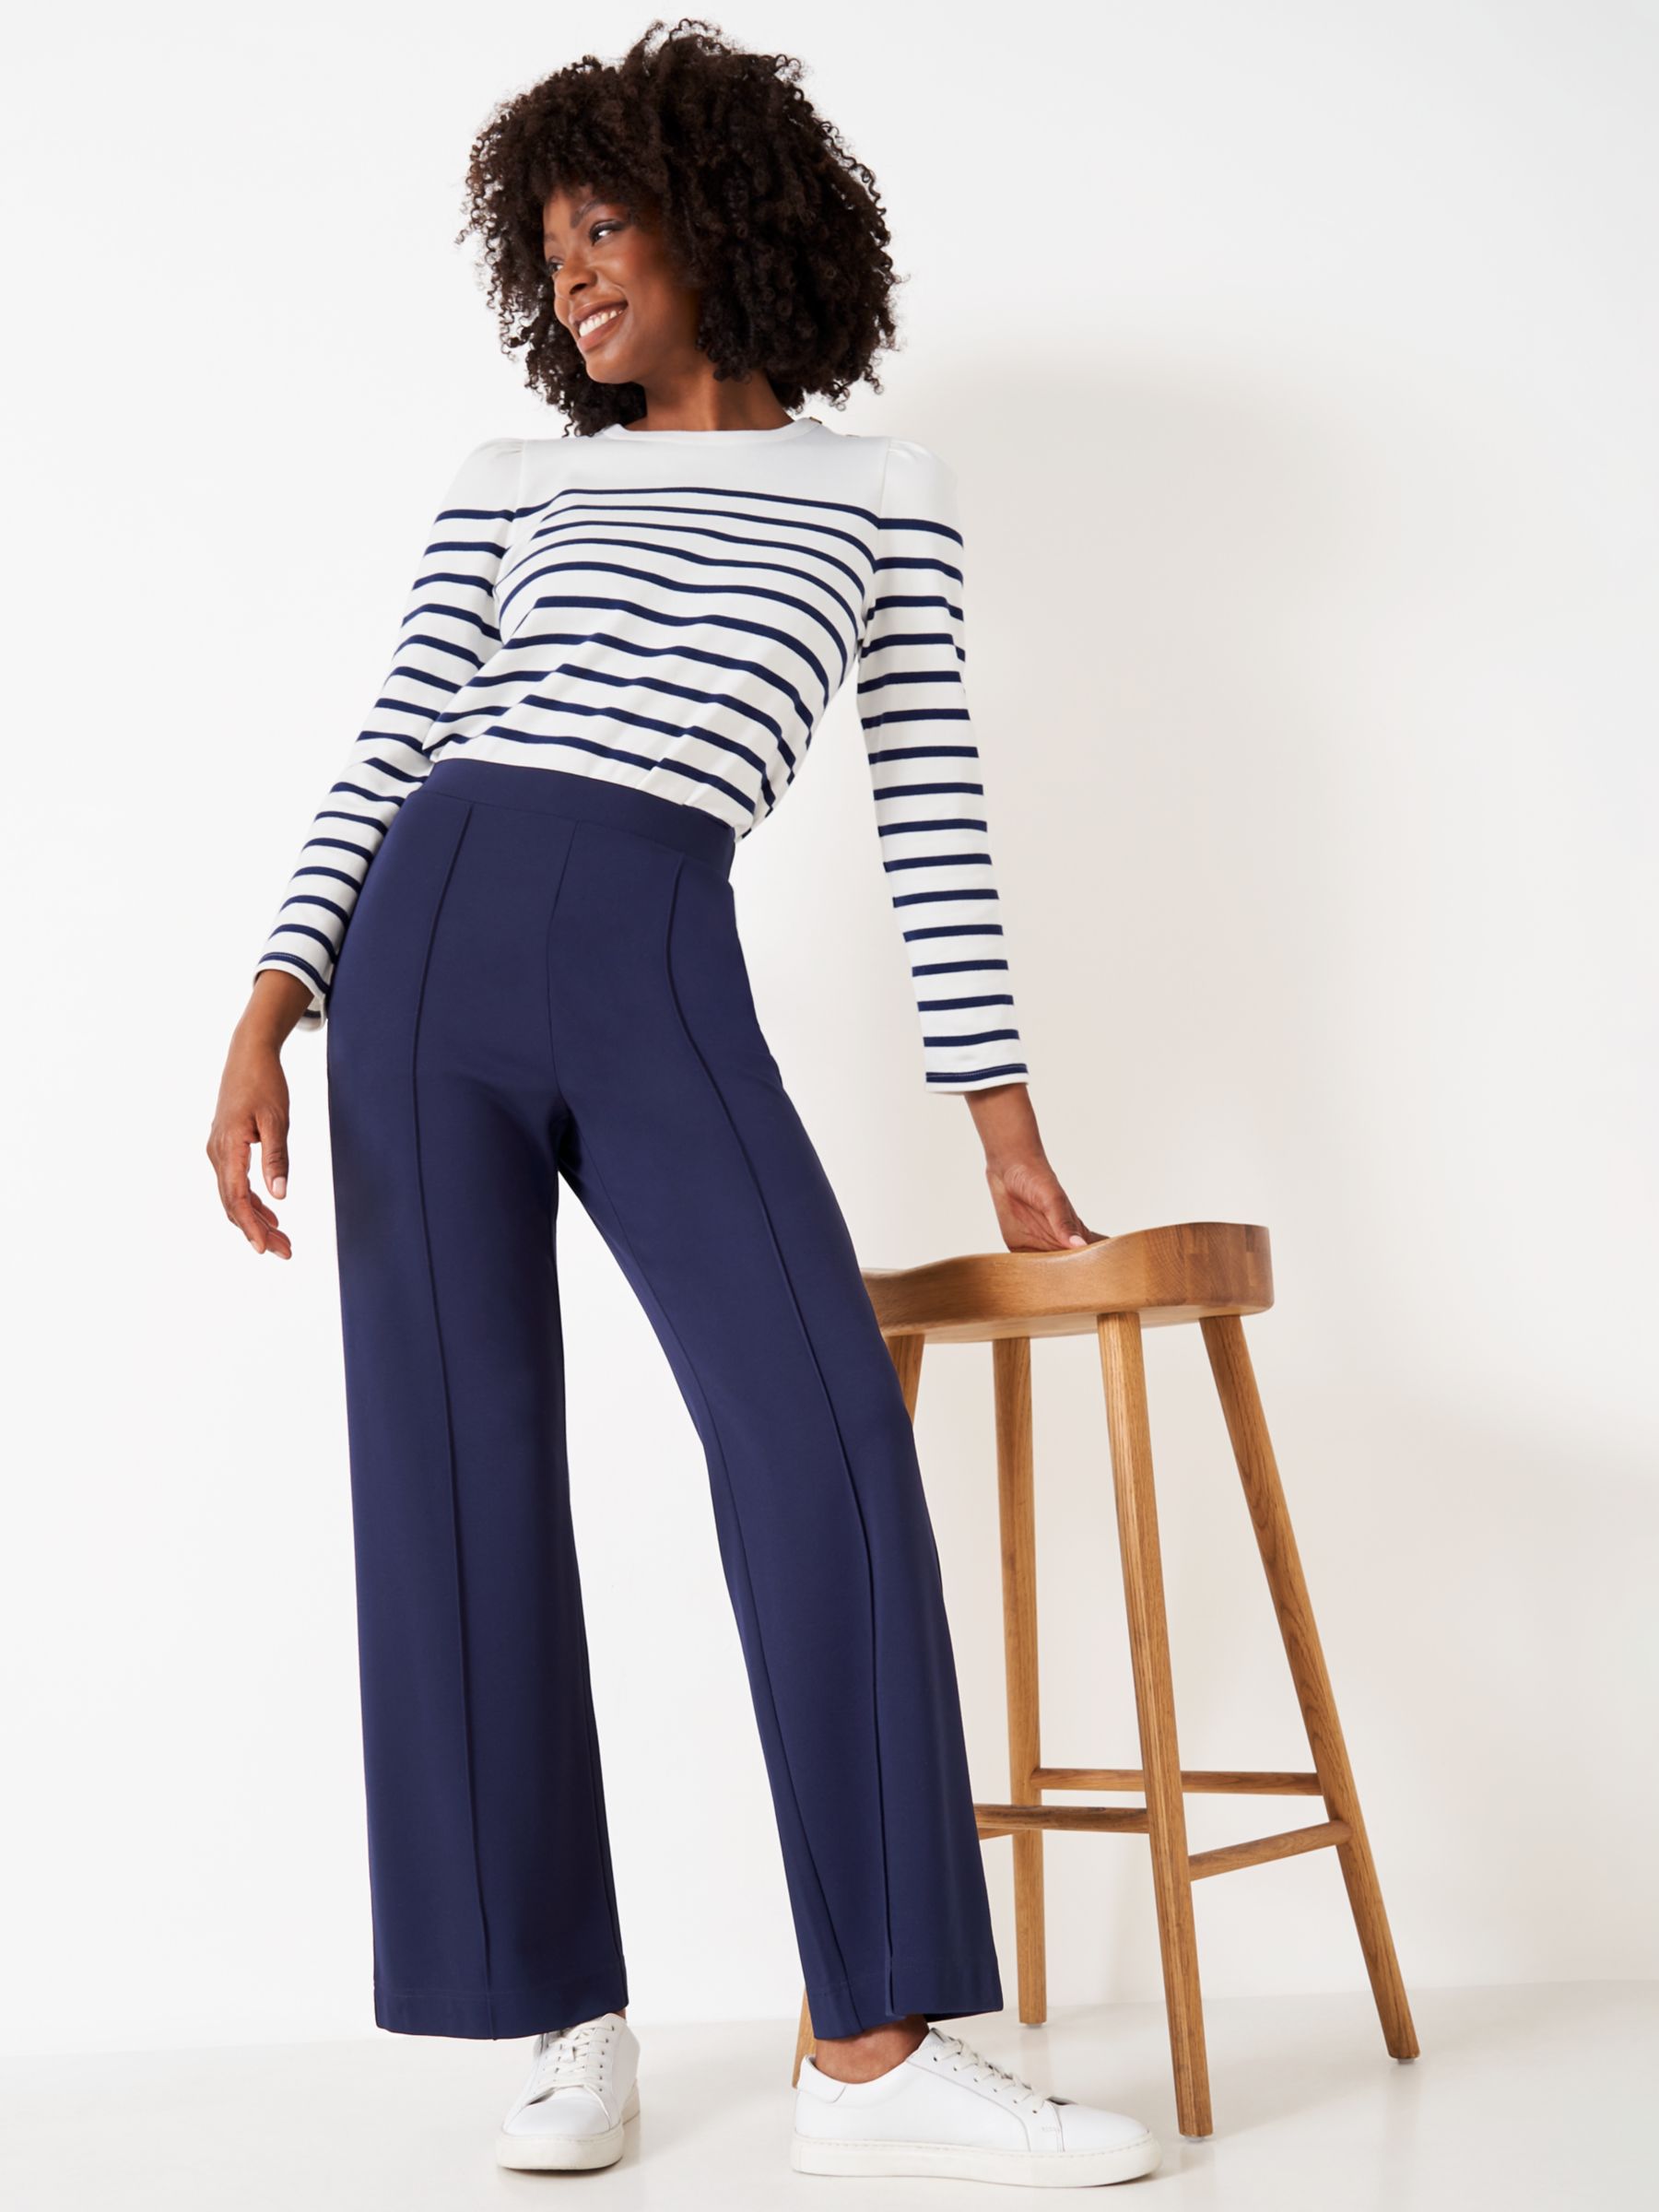 Buy Crew Clothing Westbourne Ponte Flared Trousers Online at johnlewis.com